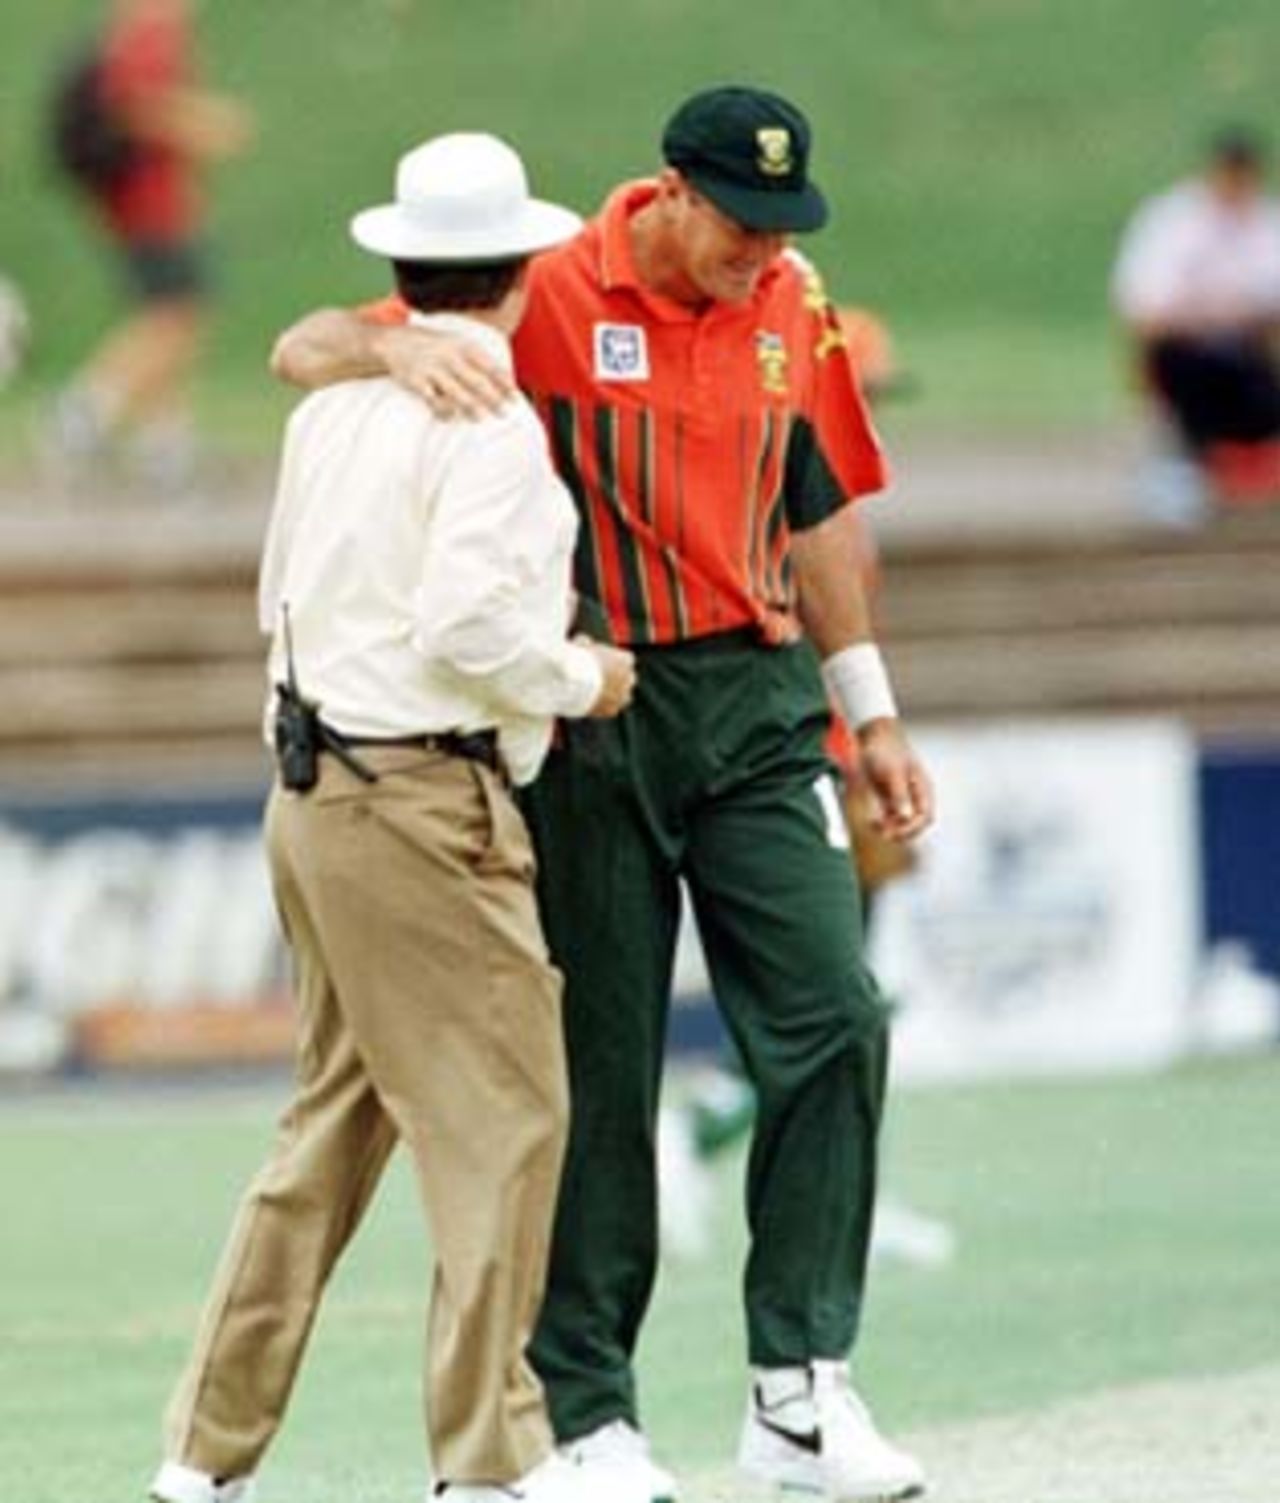 Pat Symcox cuddles umpire Emerson after his confrontation with Cronje ...South Africa v New Zealand ODI, at the Adelaide Oval, Saturday December 6th 1997.